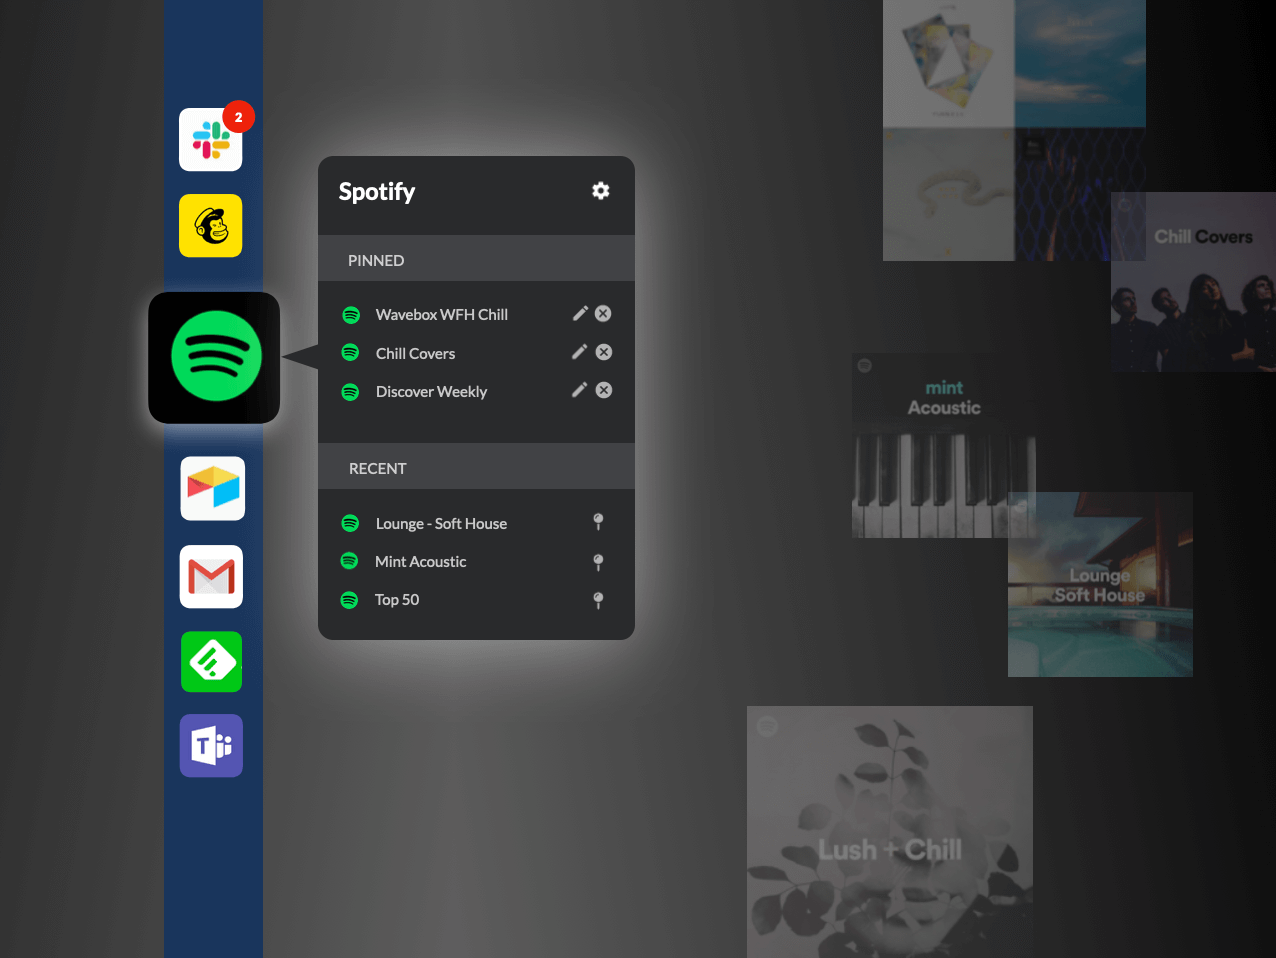 Pin & play your favorite Spotify music.